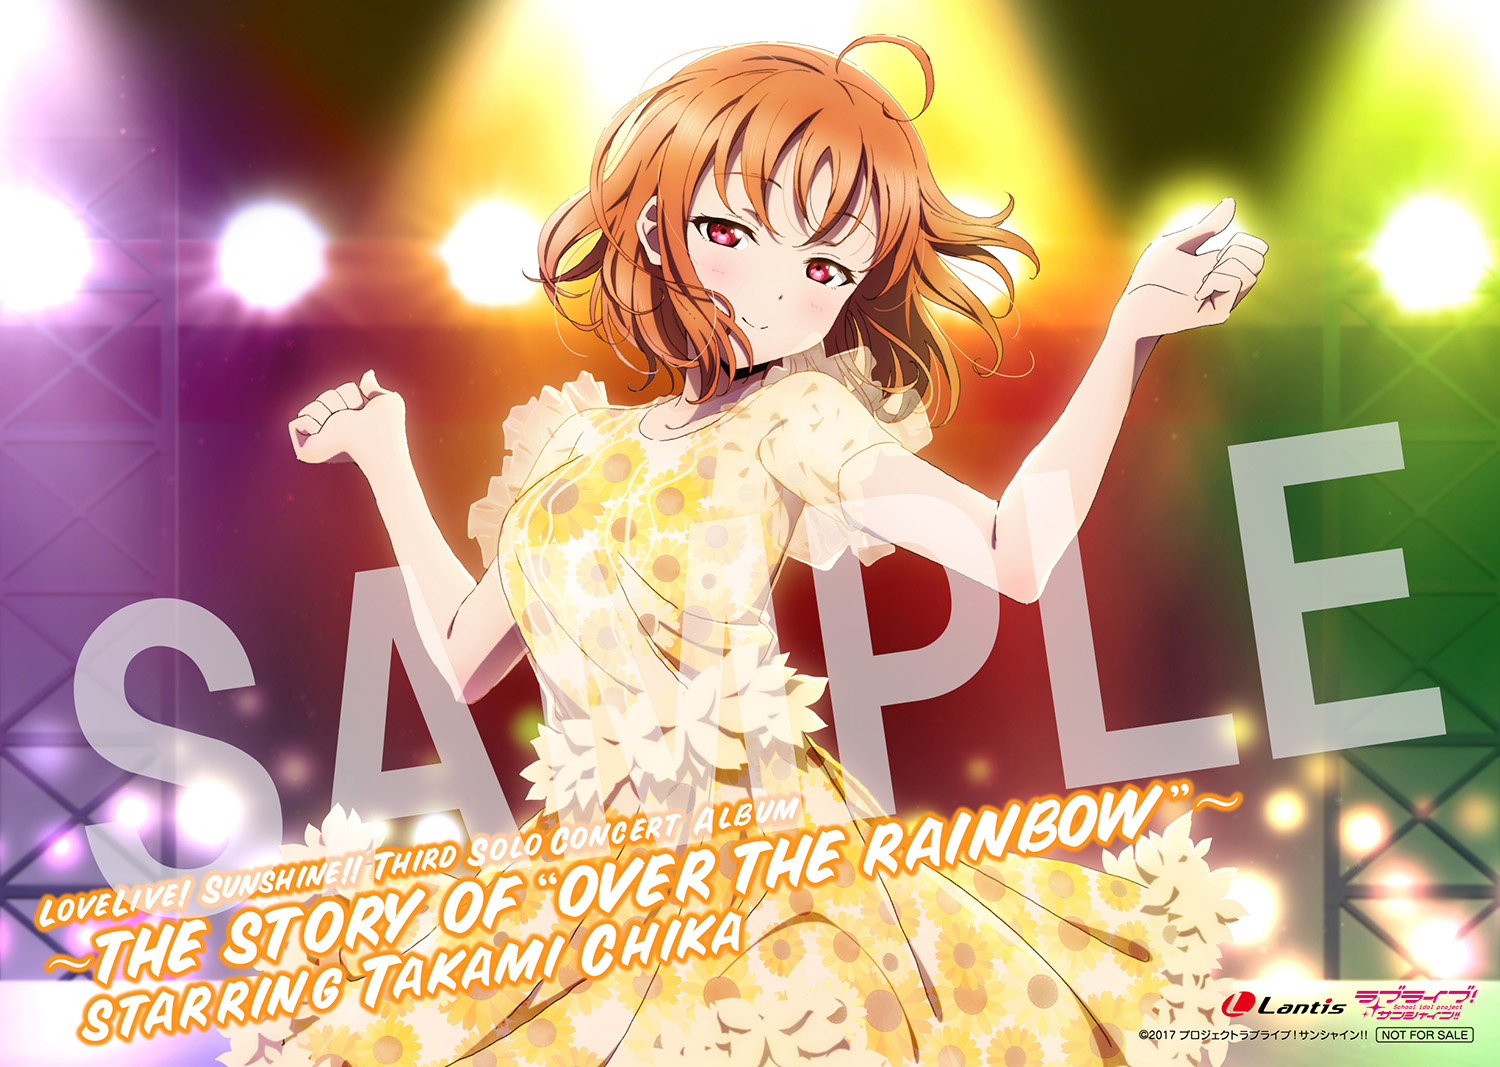 LoveLive! Sunshine!! Third Solo Concert Album ～THE STORY OF “OVER 